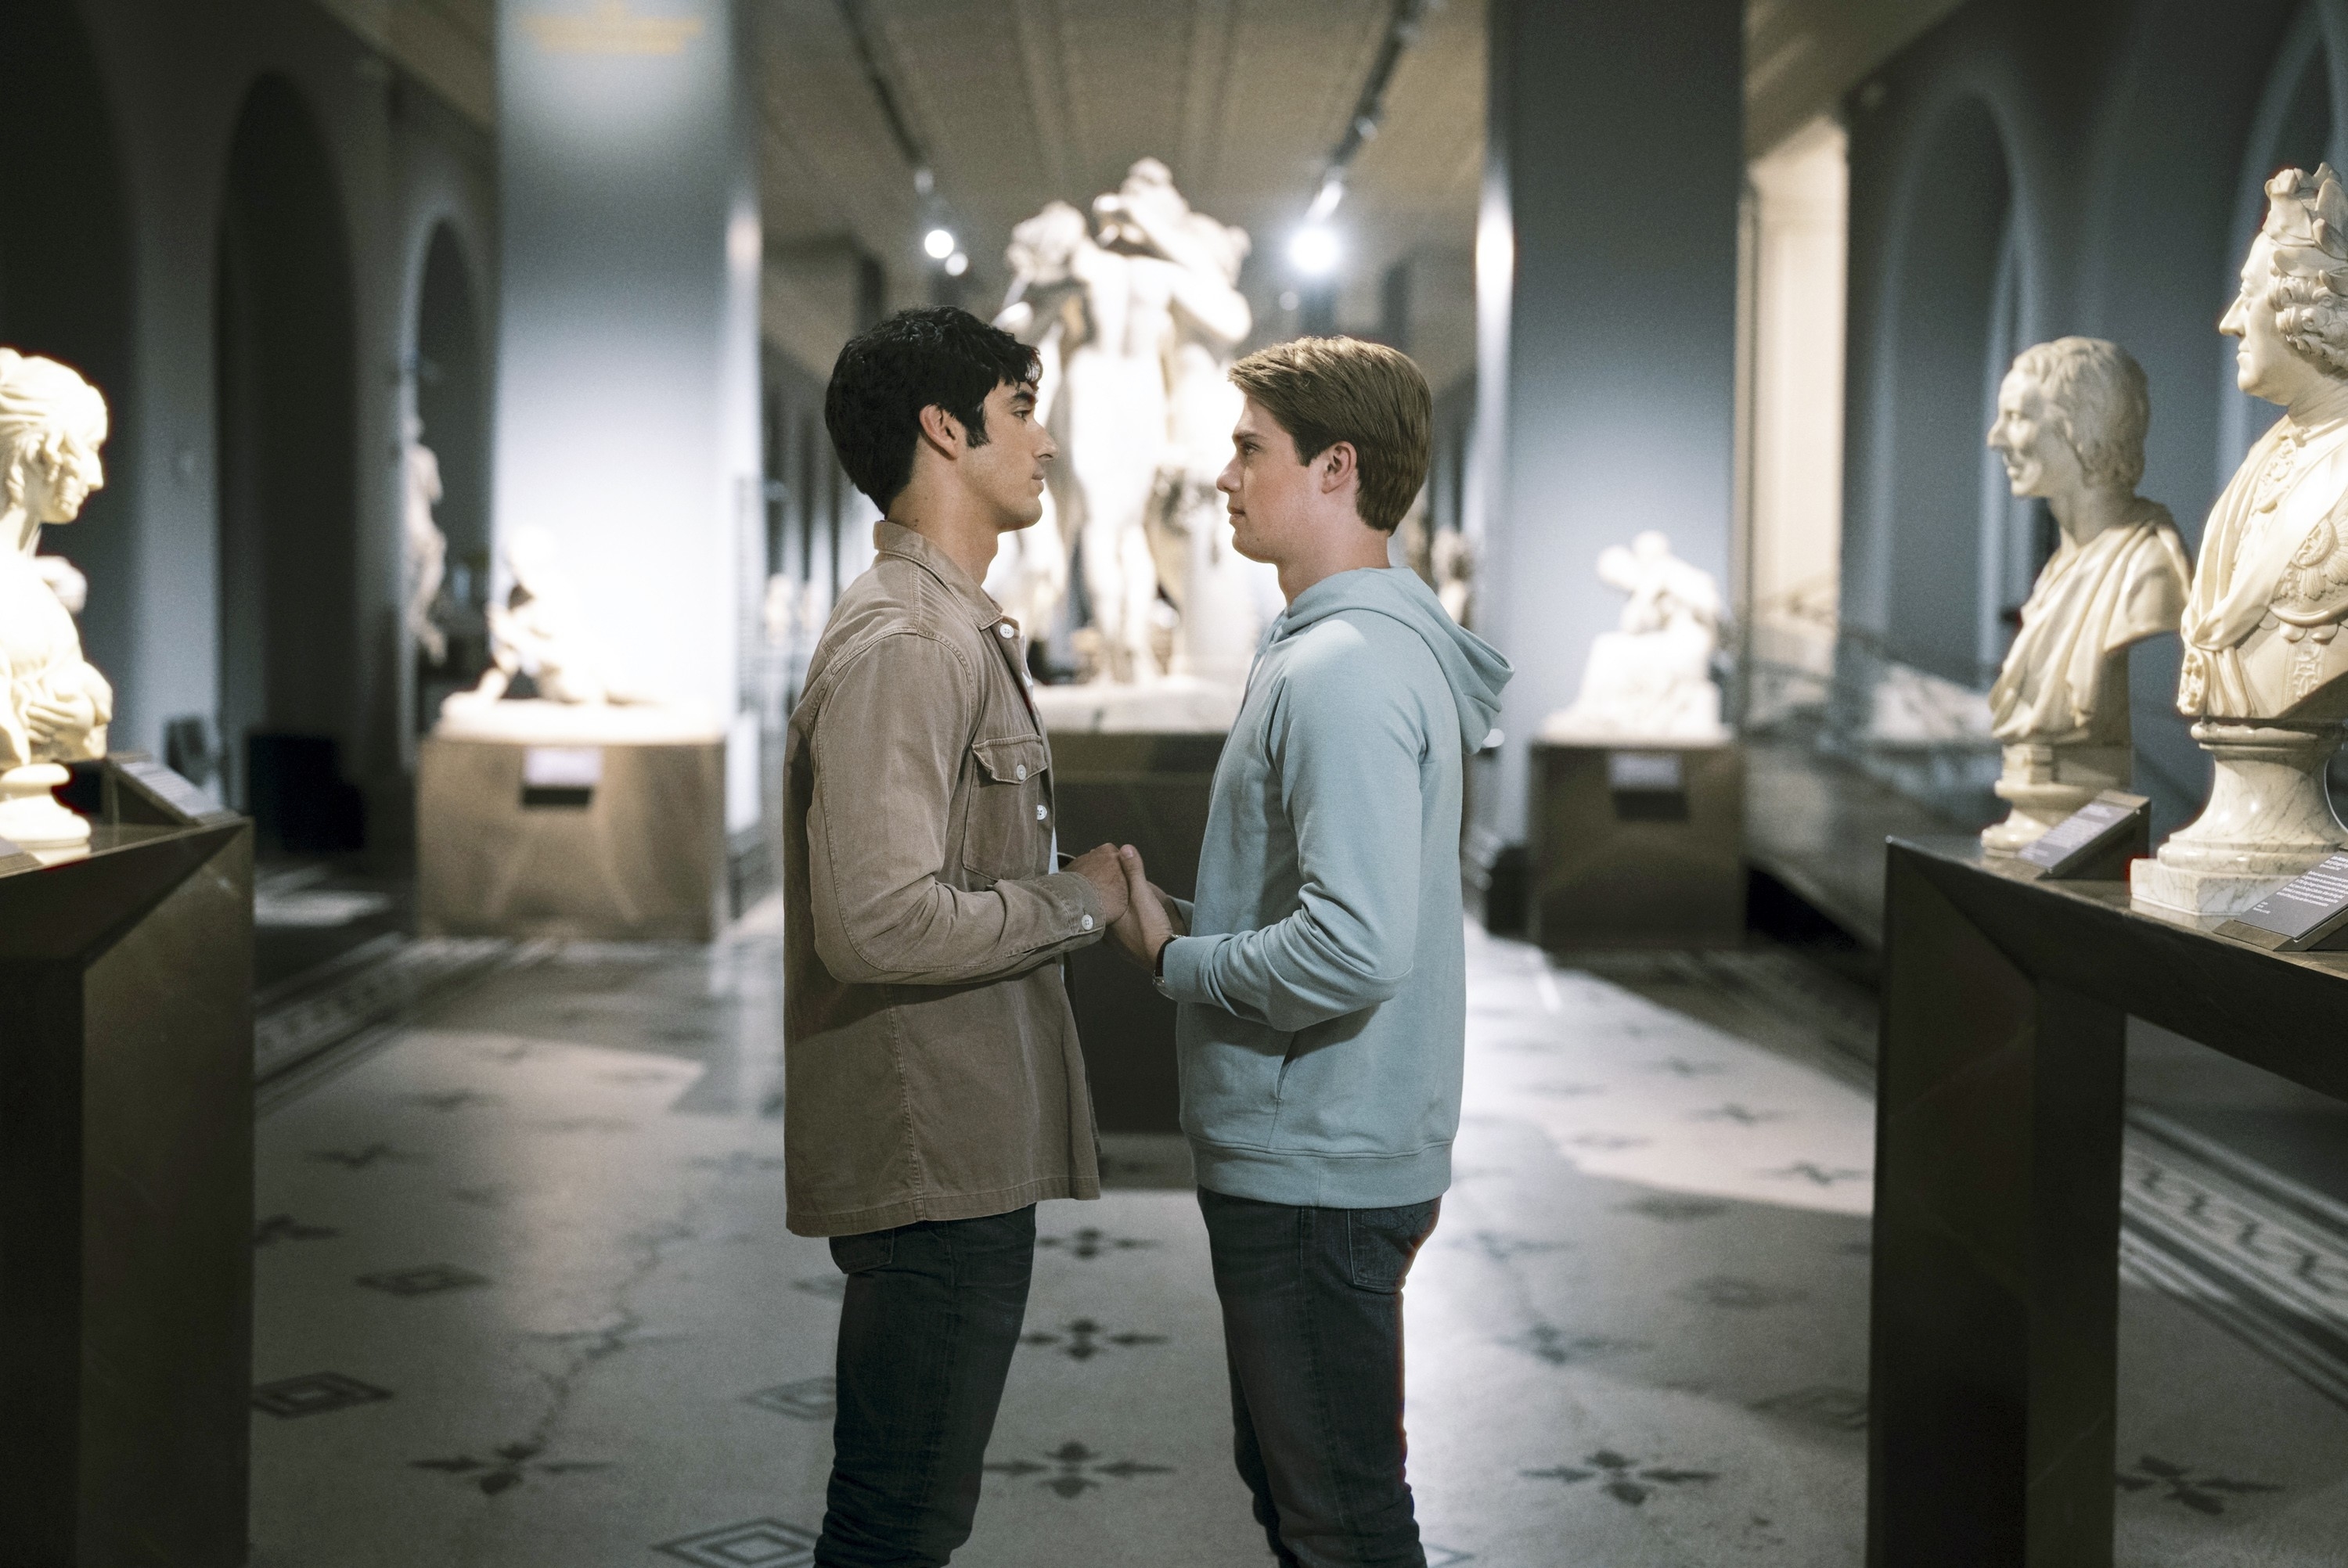 in a scene, Nicholas and Taylor portraying a couple holding hands in a museum, facing each other with classical statues in the background